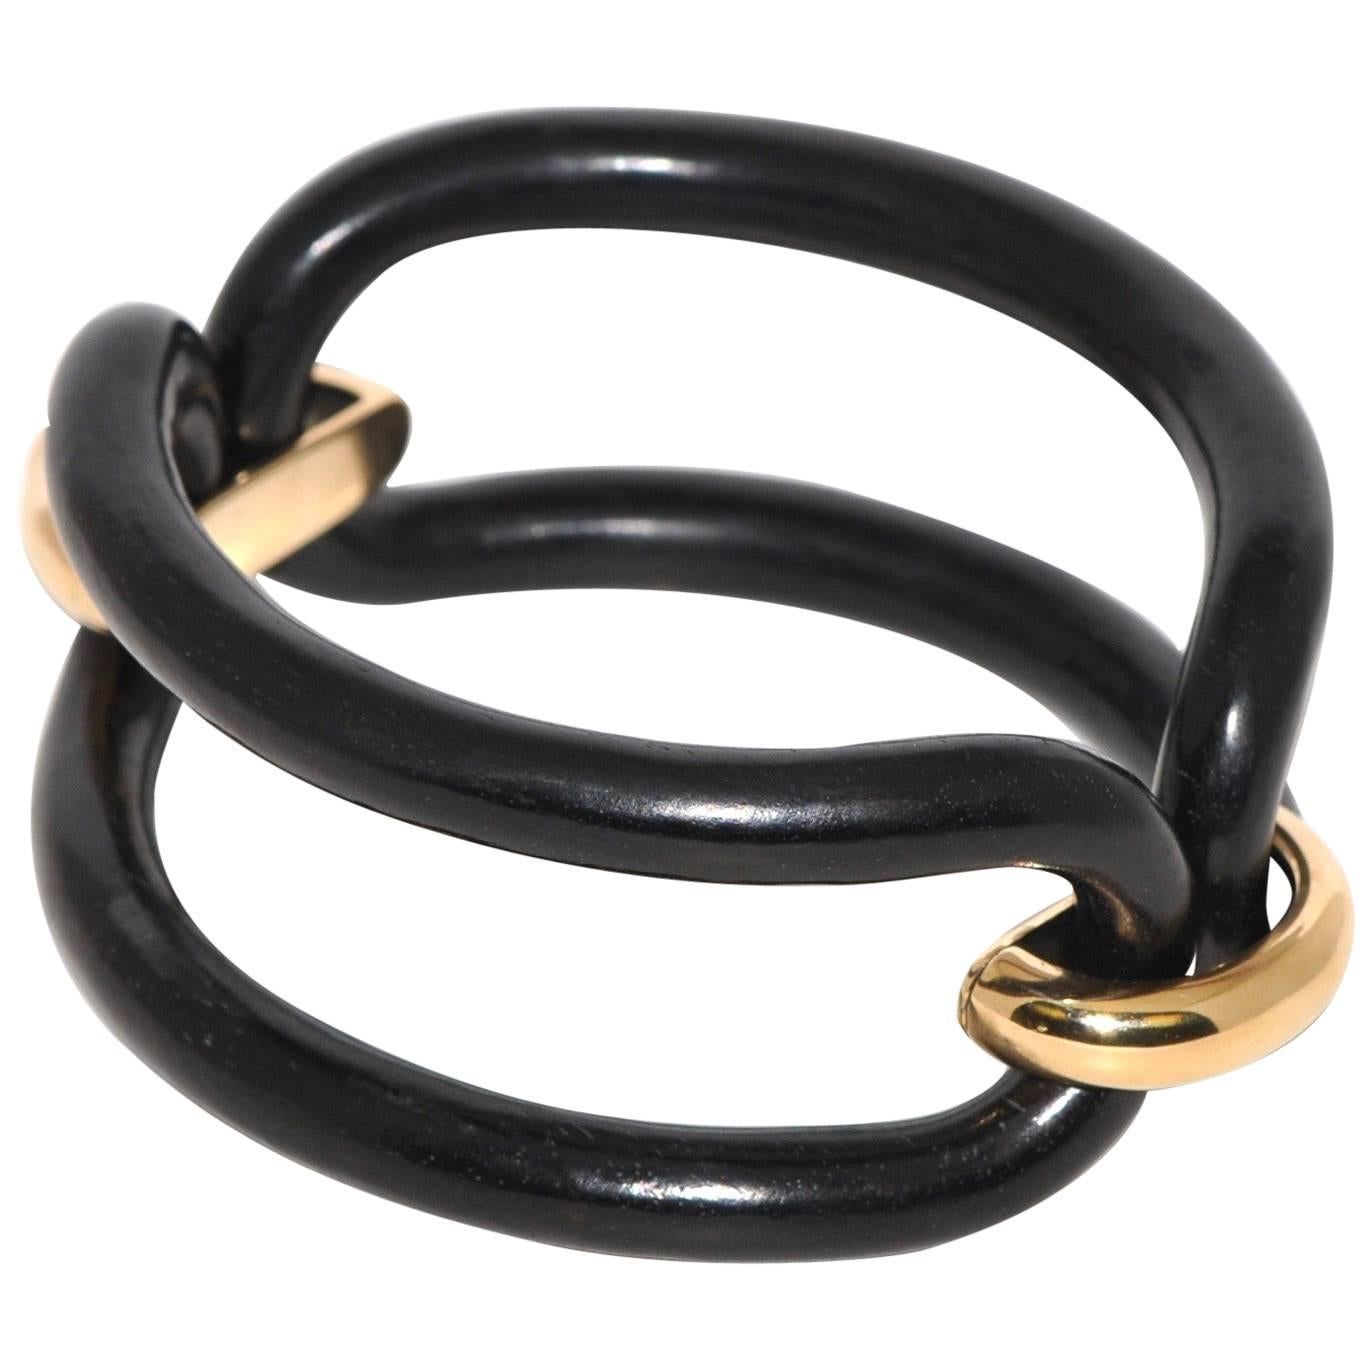 Ebony Wood and Yellow Gold 11.6 gr Articulated Bracelet